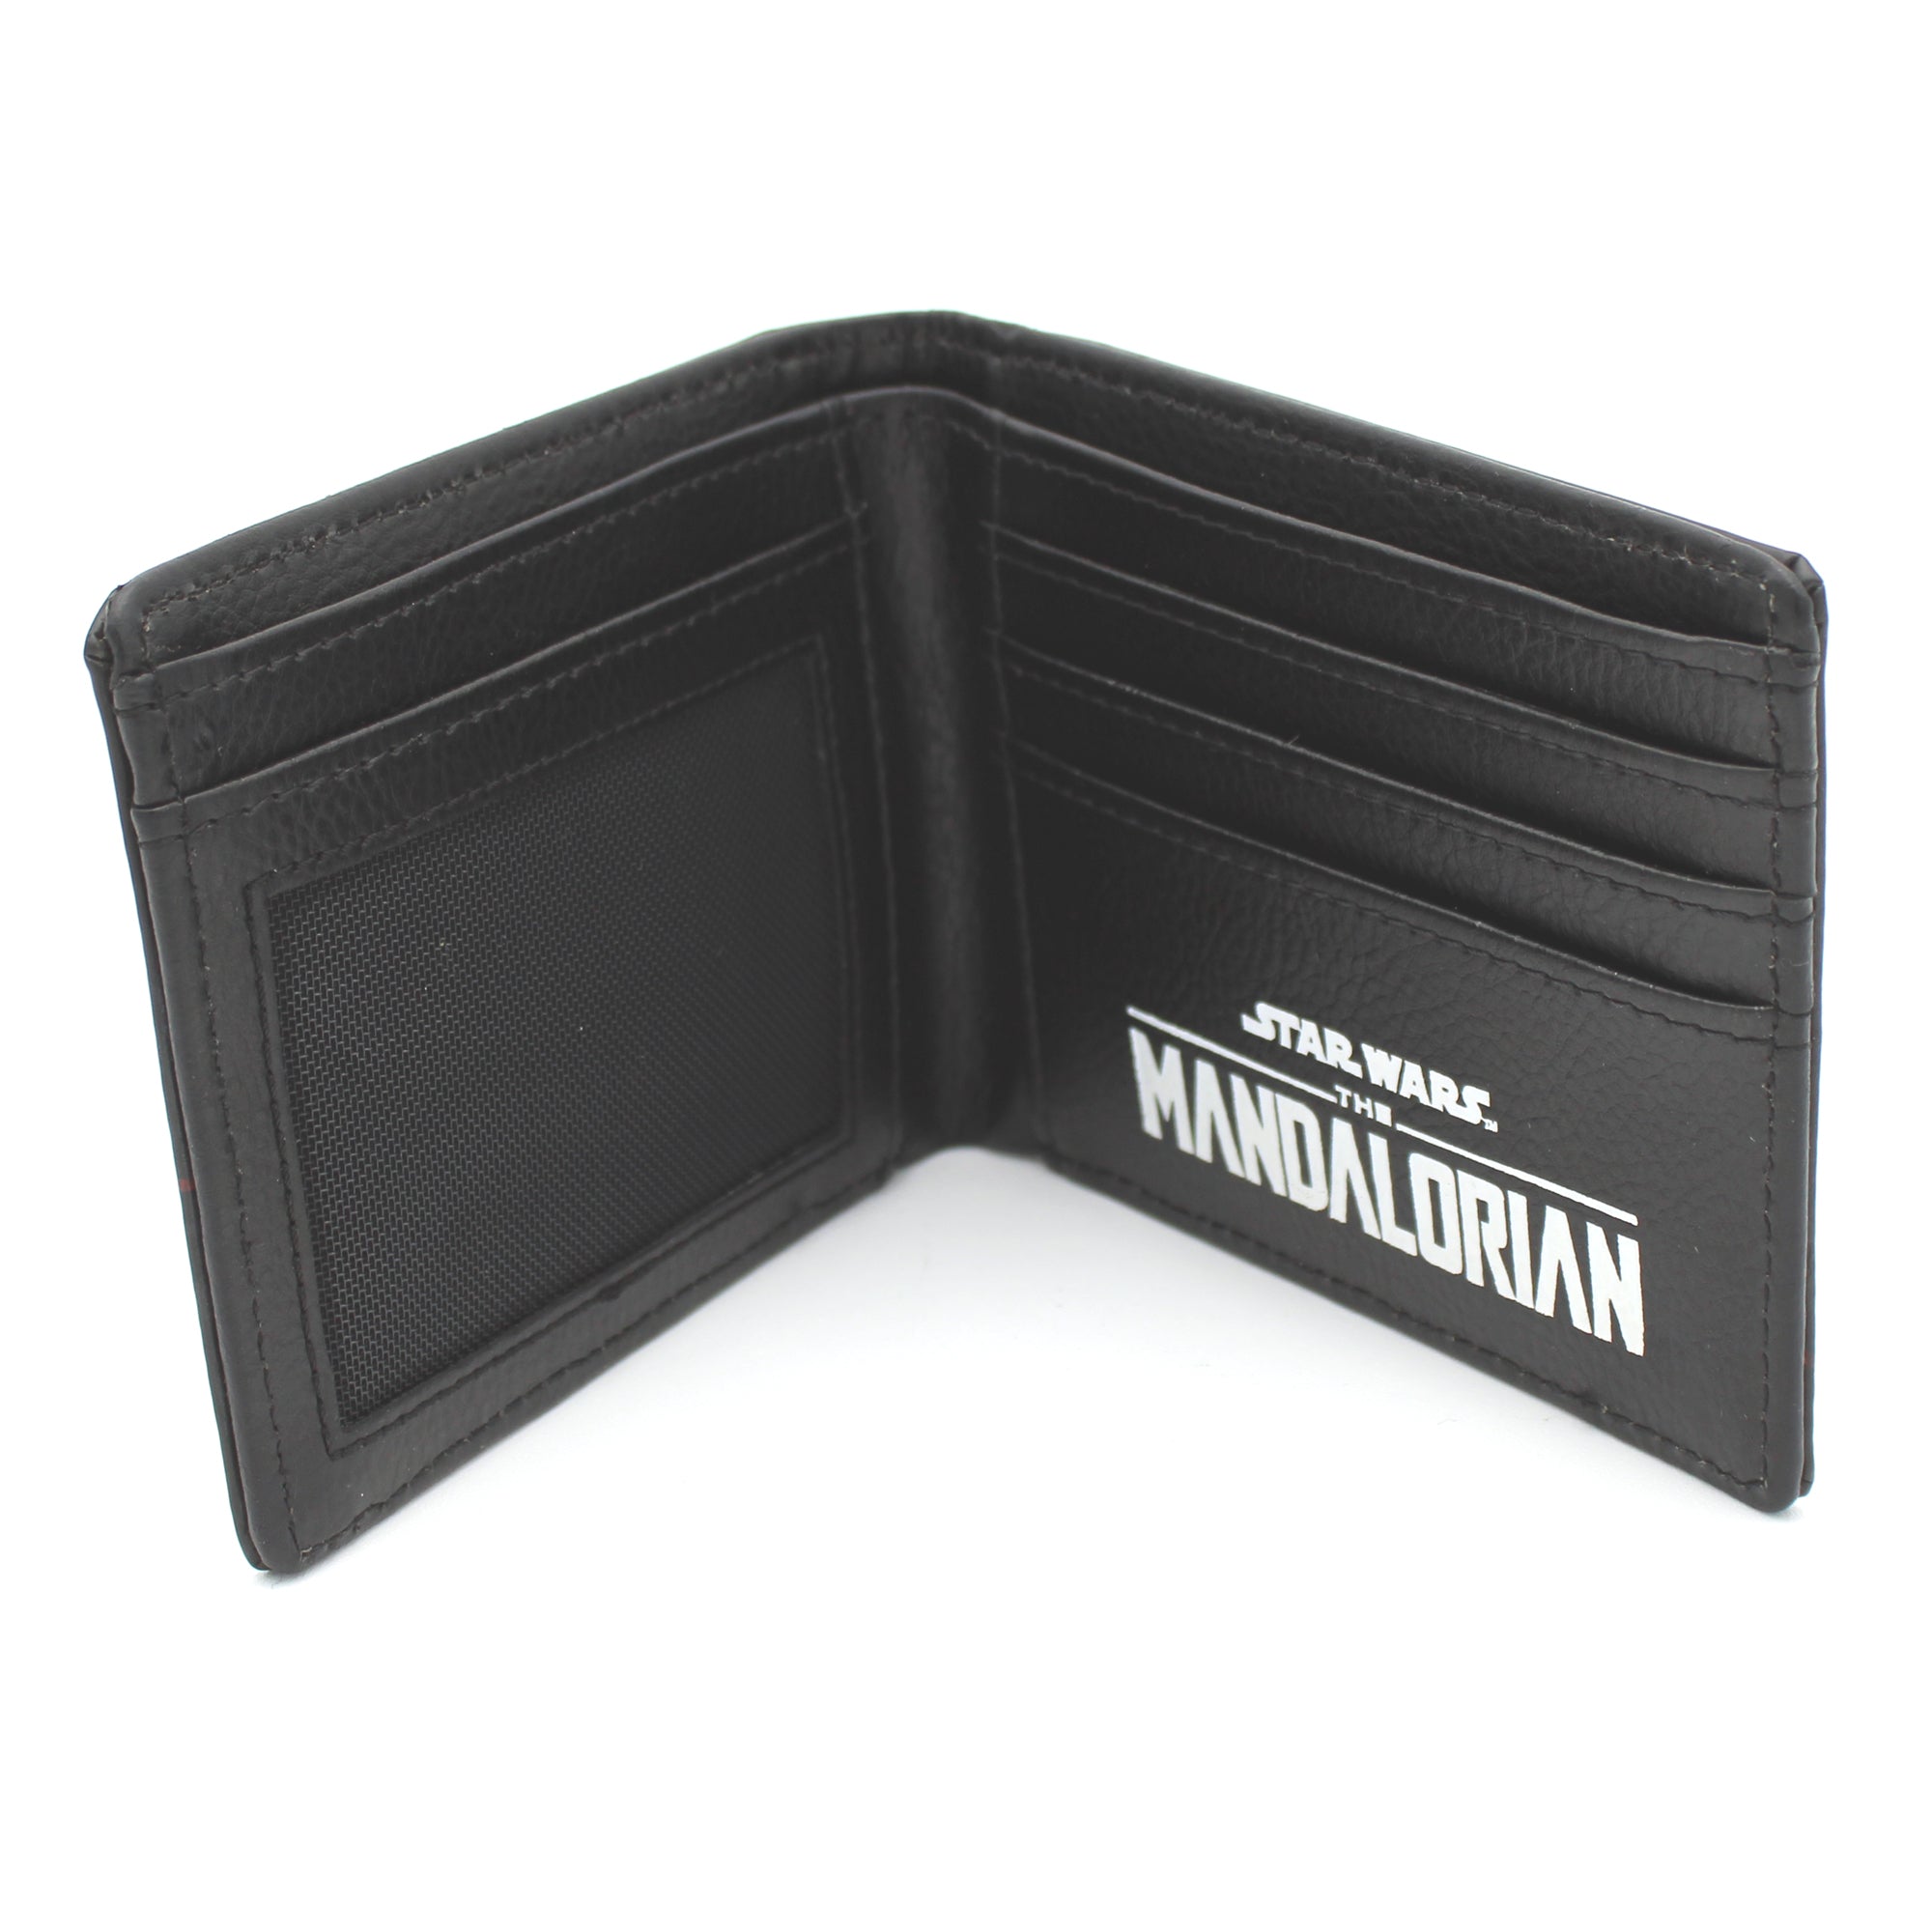 Star Wars The Mandalorian Bi-Fold Wallet with Gift Tin - Concept One - 4